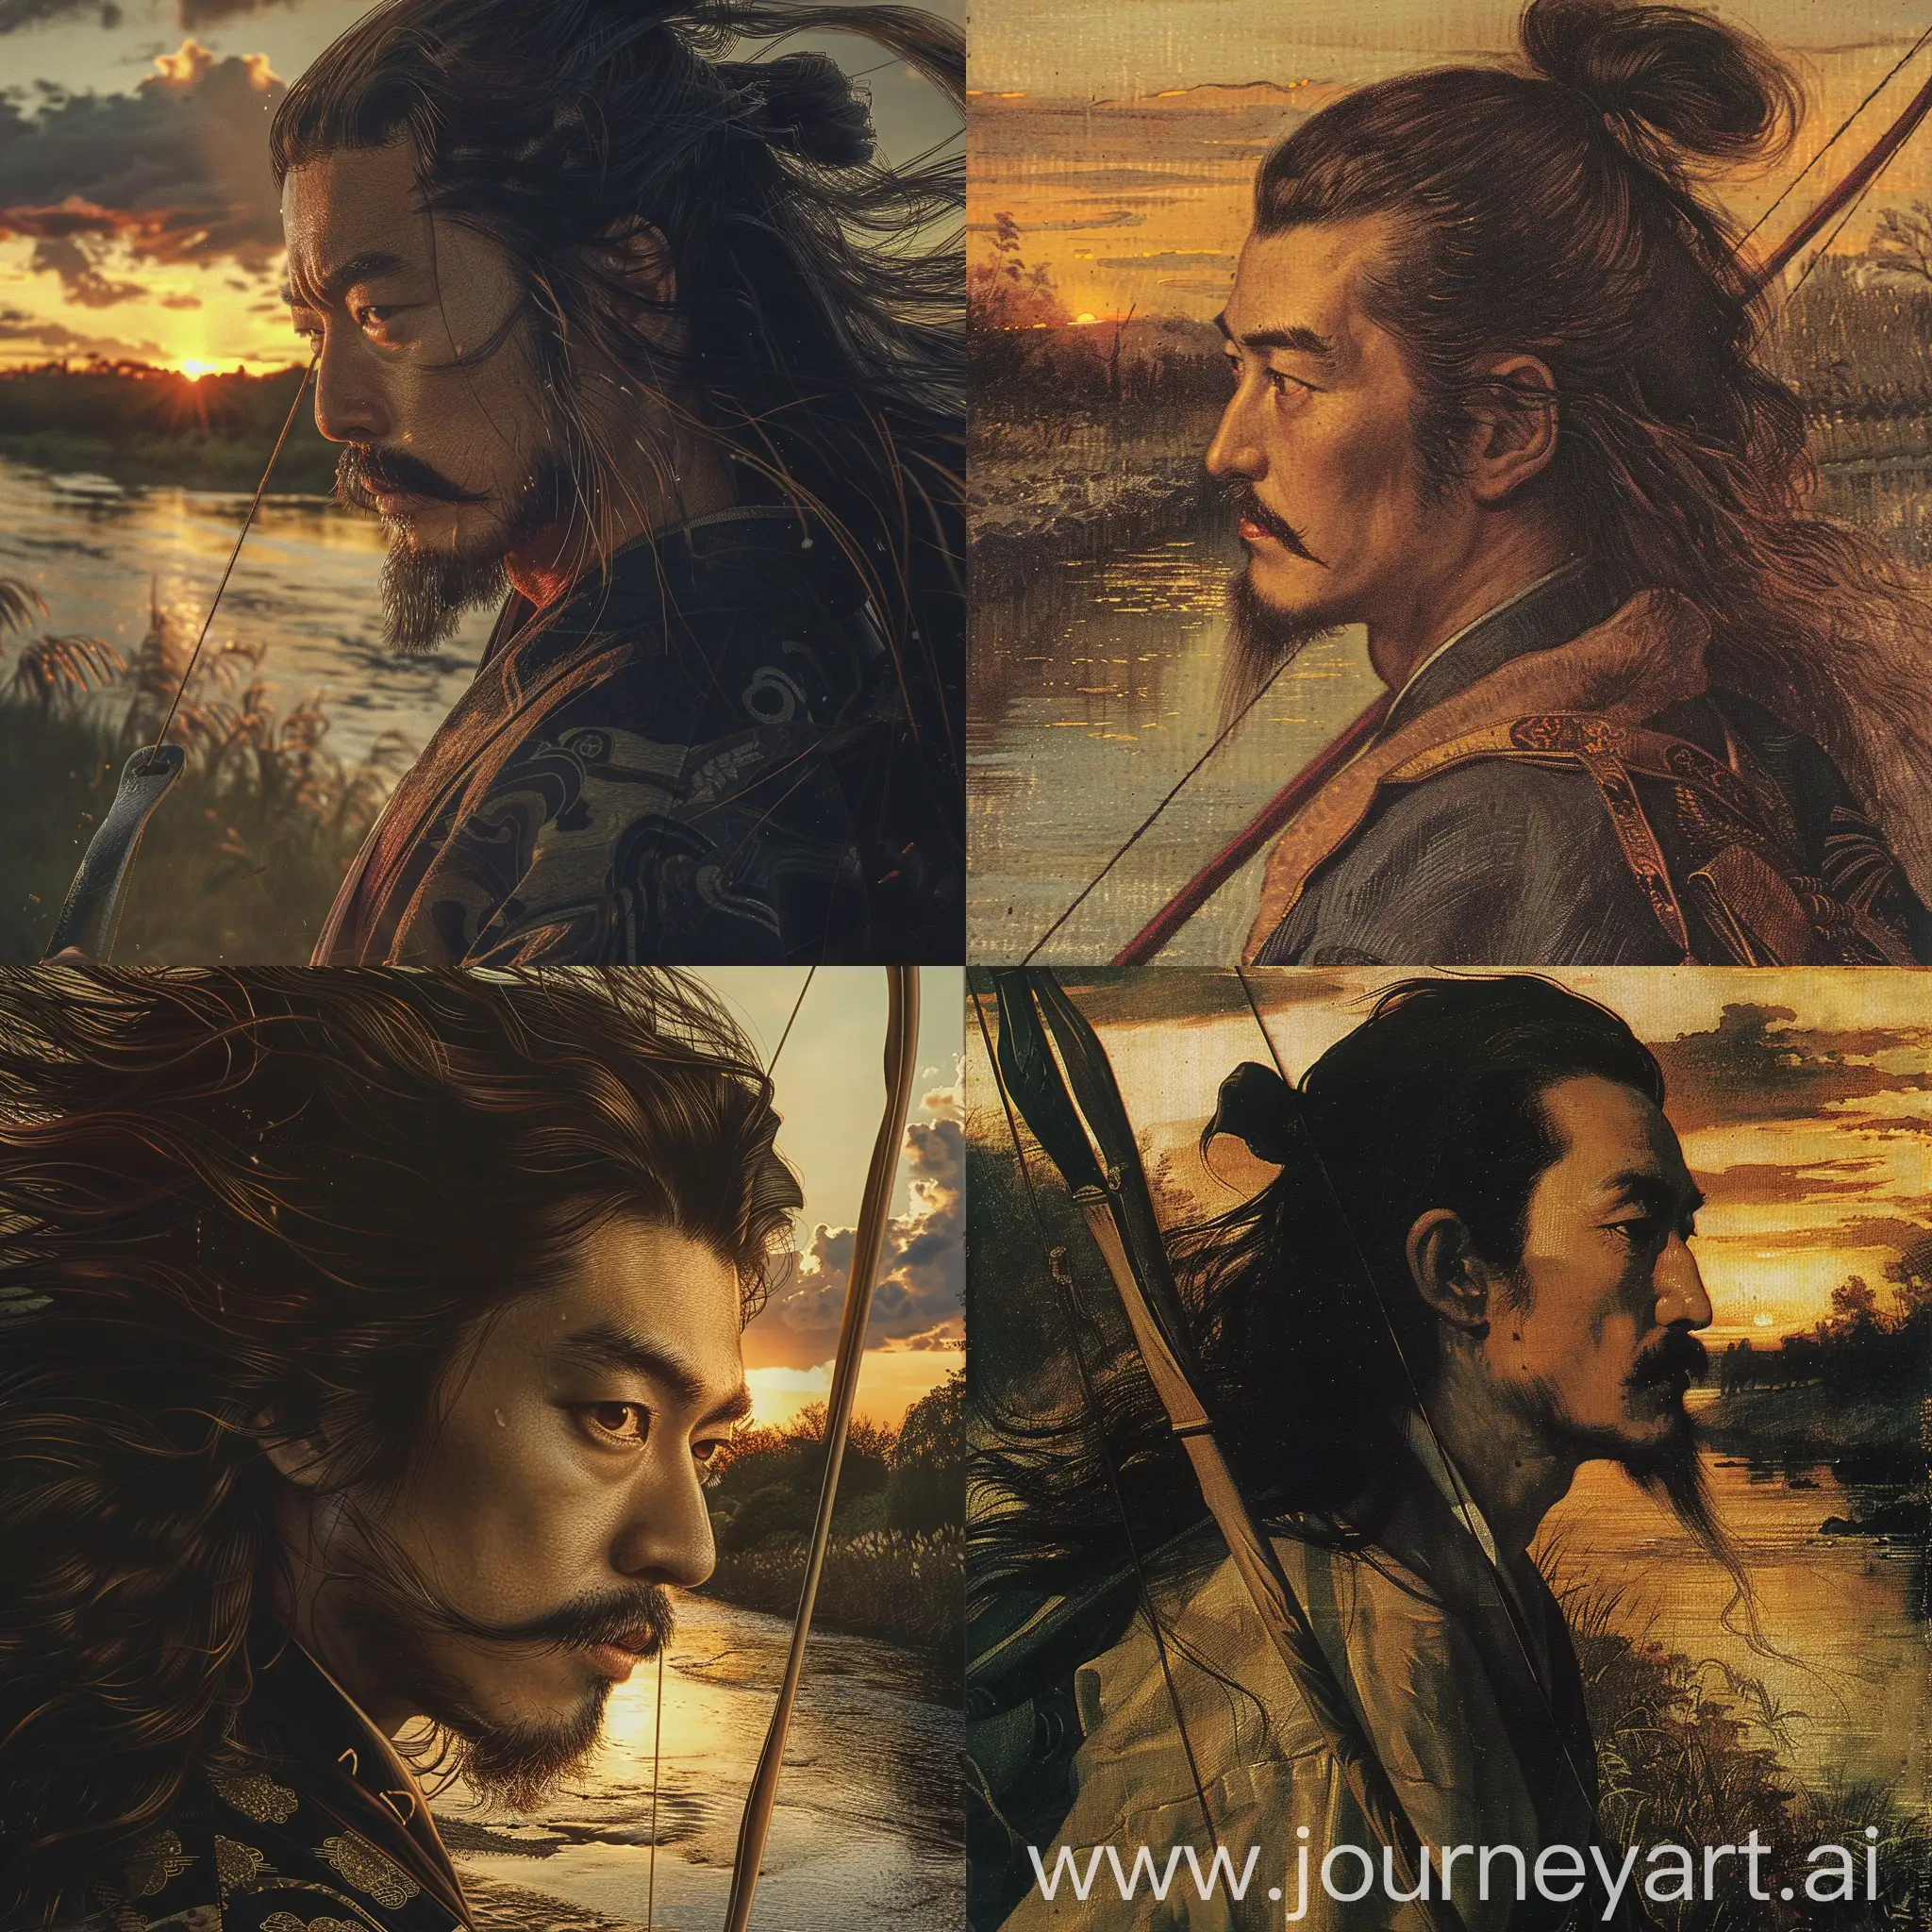 First-Japanese-Emperor-Jimmu-with-Long-Hair-and-Bow-at-Sunset-by-the-River